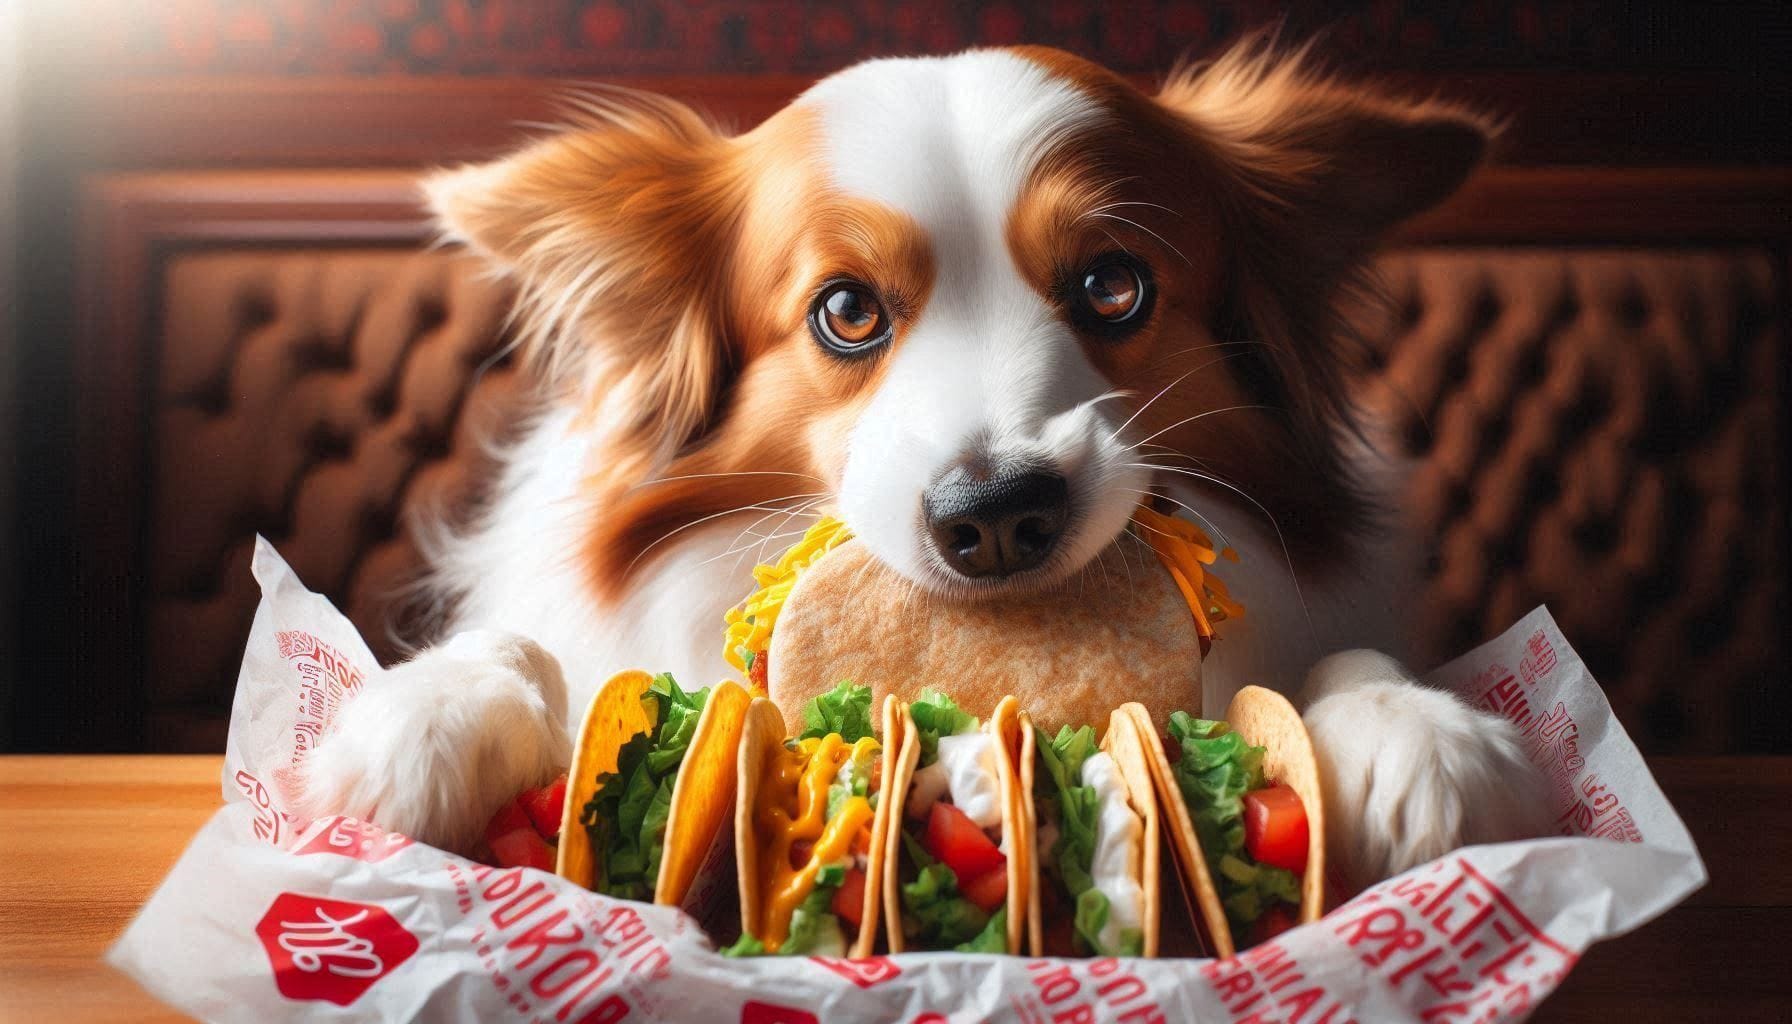 A Dog Eating Jack in the Box Tacos